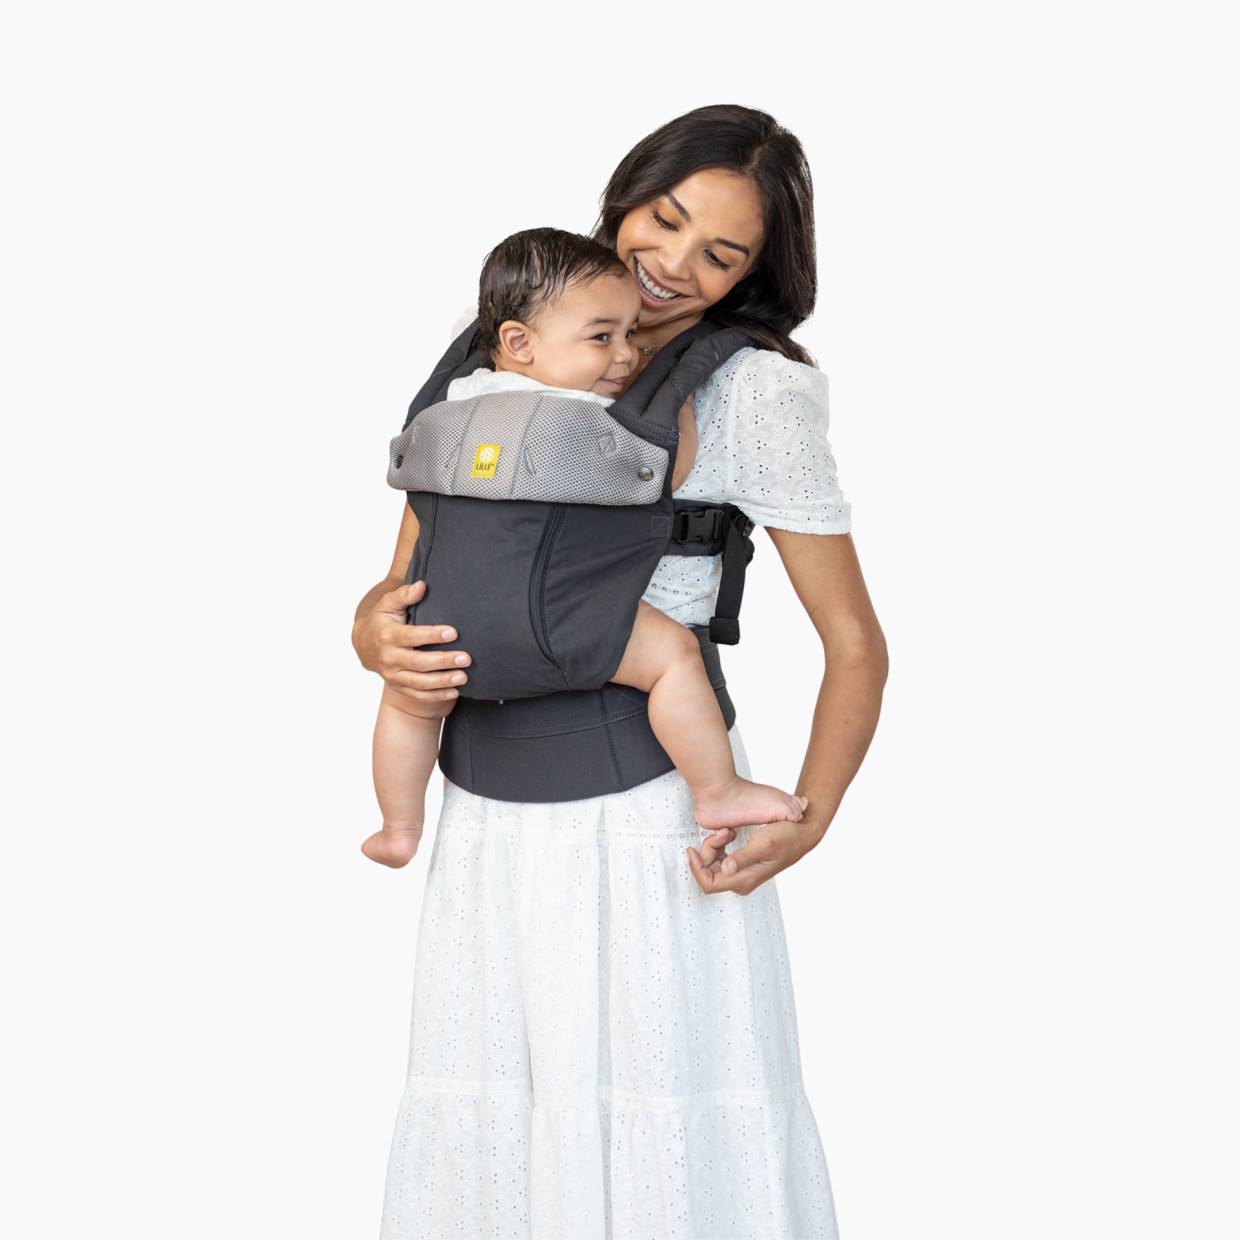 lillebaby Complete All Seasons 6-1 Baby Carrier - Charcoal/Silver.